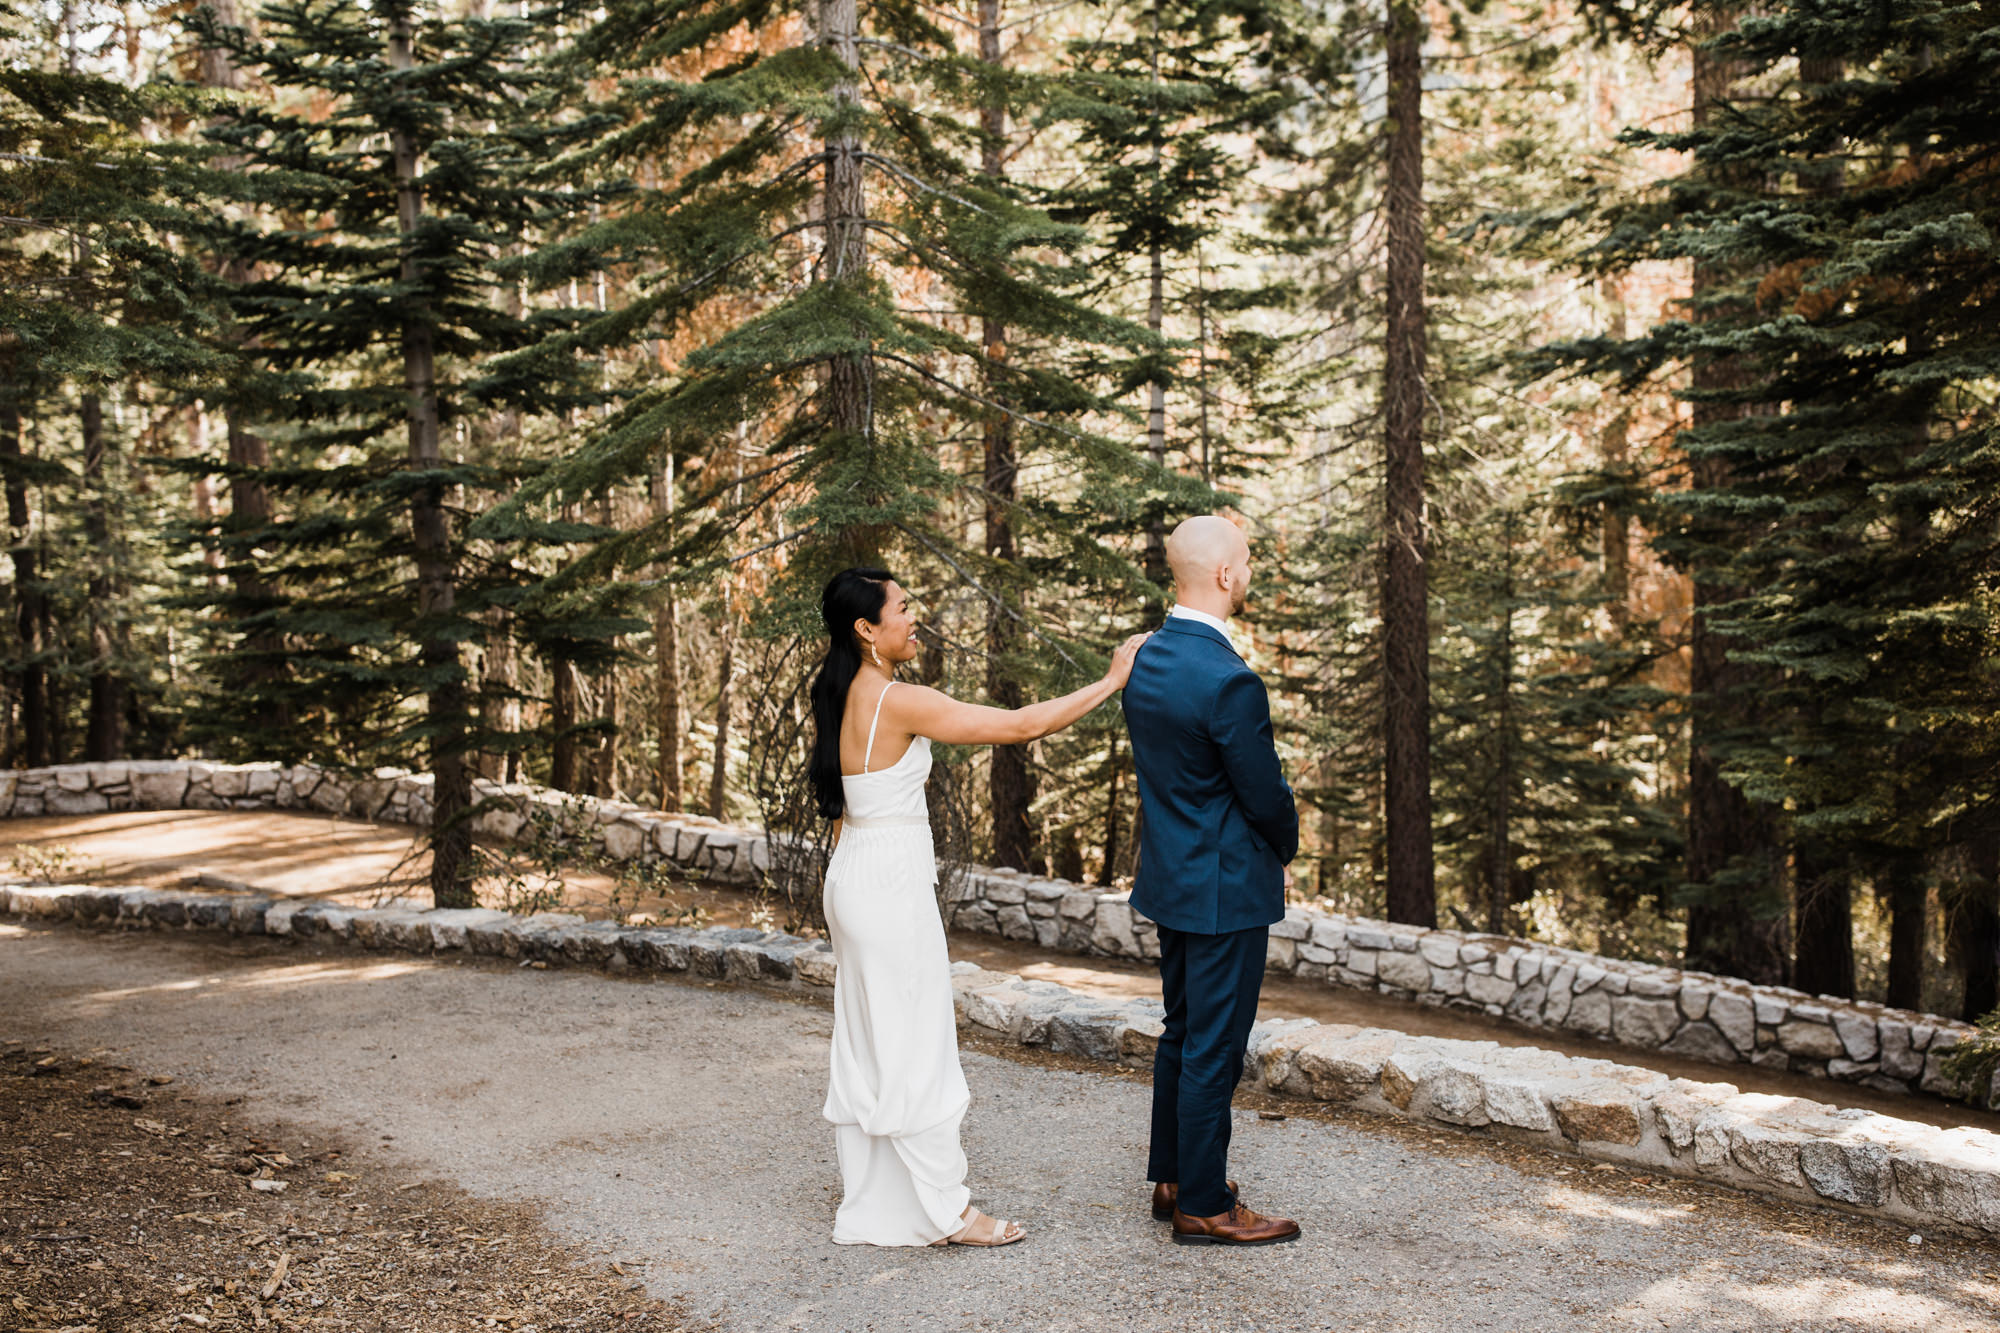 Intimate wedding in Yosemite national park | Glacier Point First look | Portraits at Taft Point | Traveling adventure elopement photographer